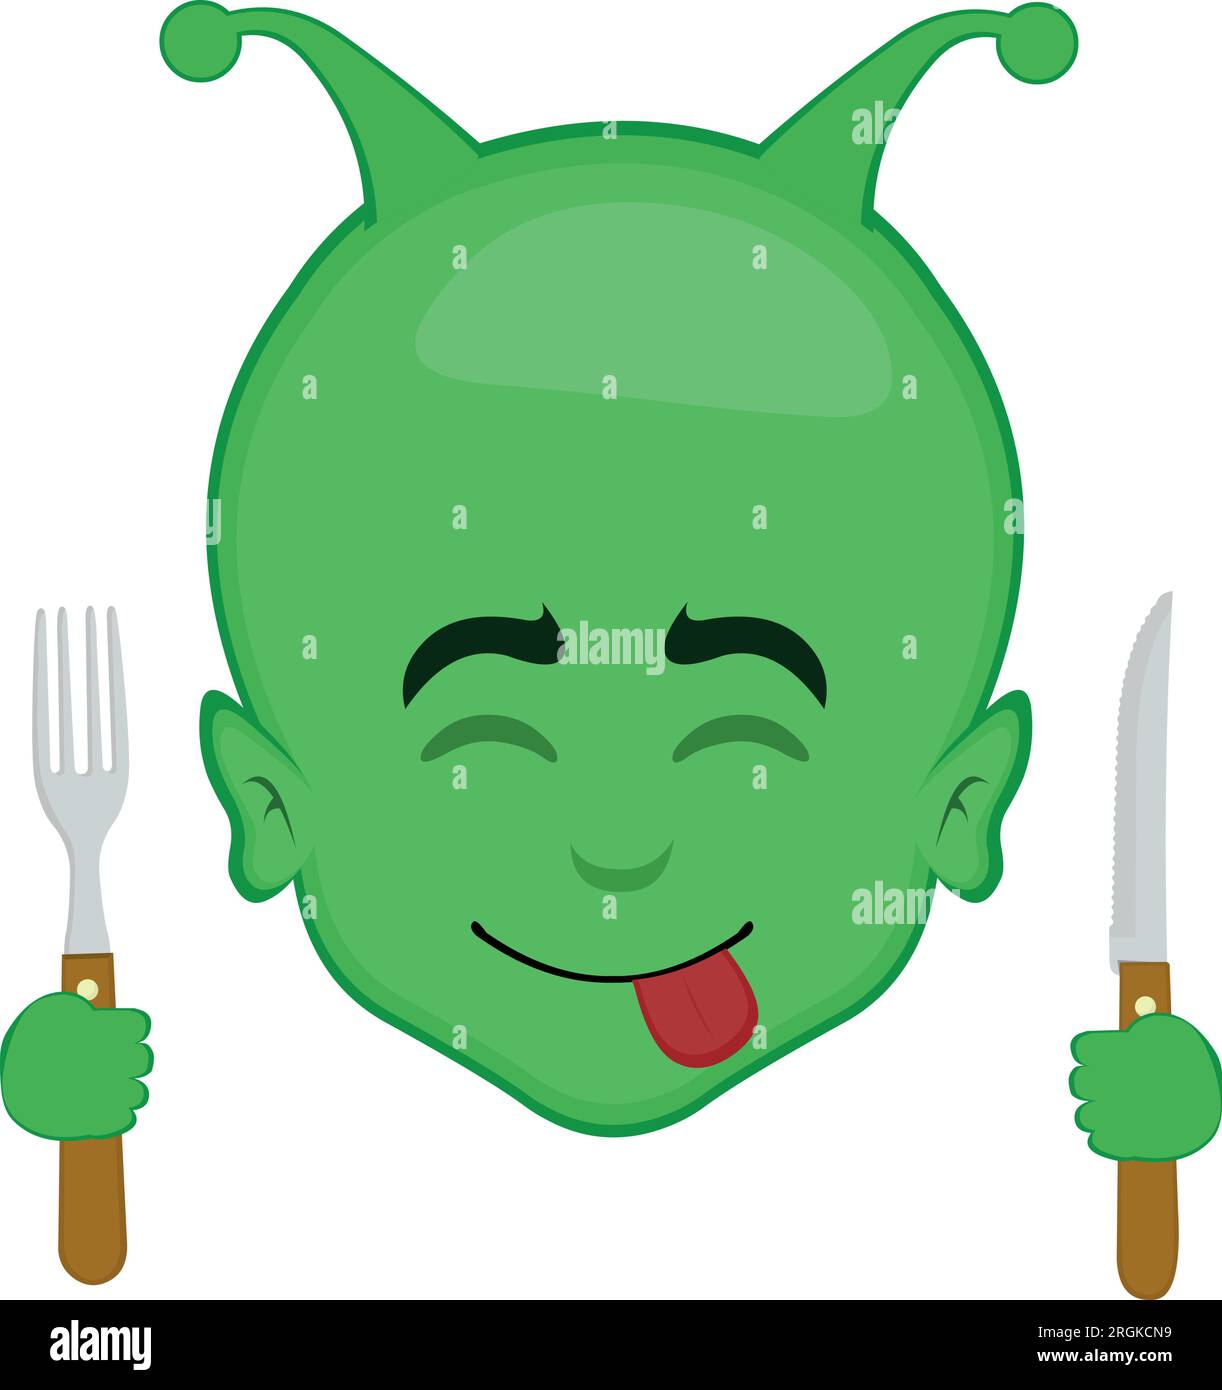 vector illustration face alien or extraterrestrial cartoon, an expression of yummy how delicious with a knife and fork in his hands Stock Vector